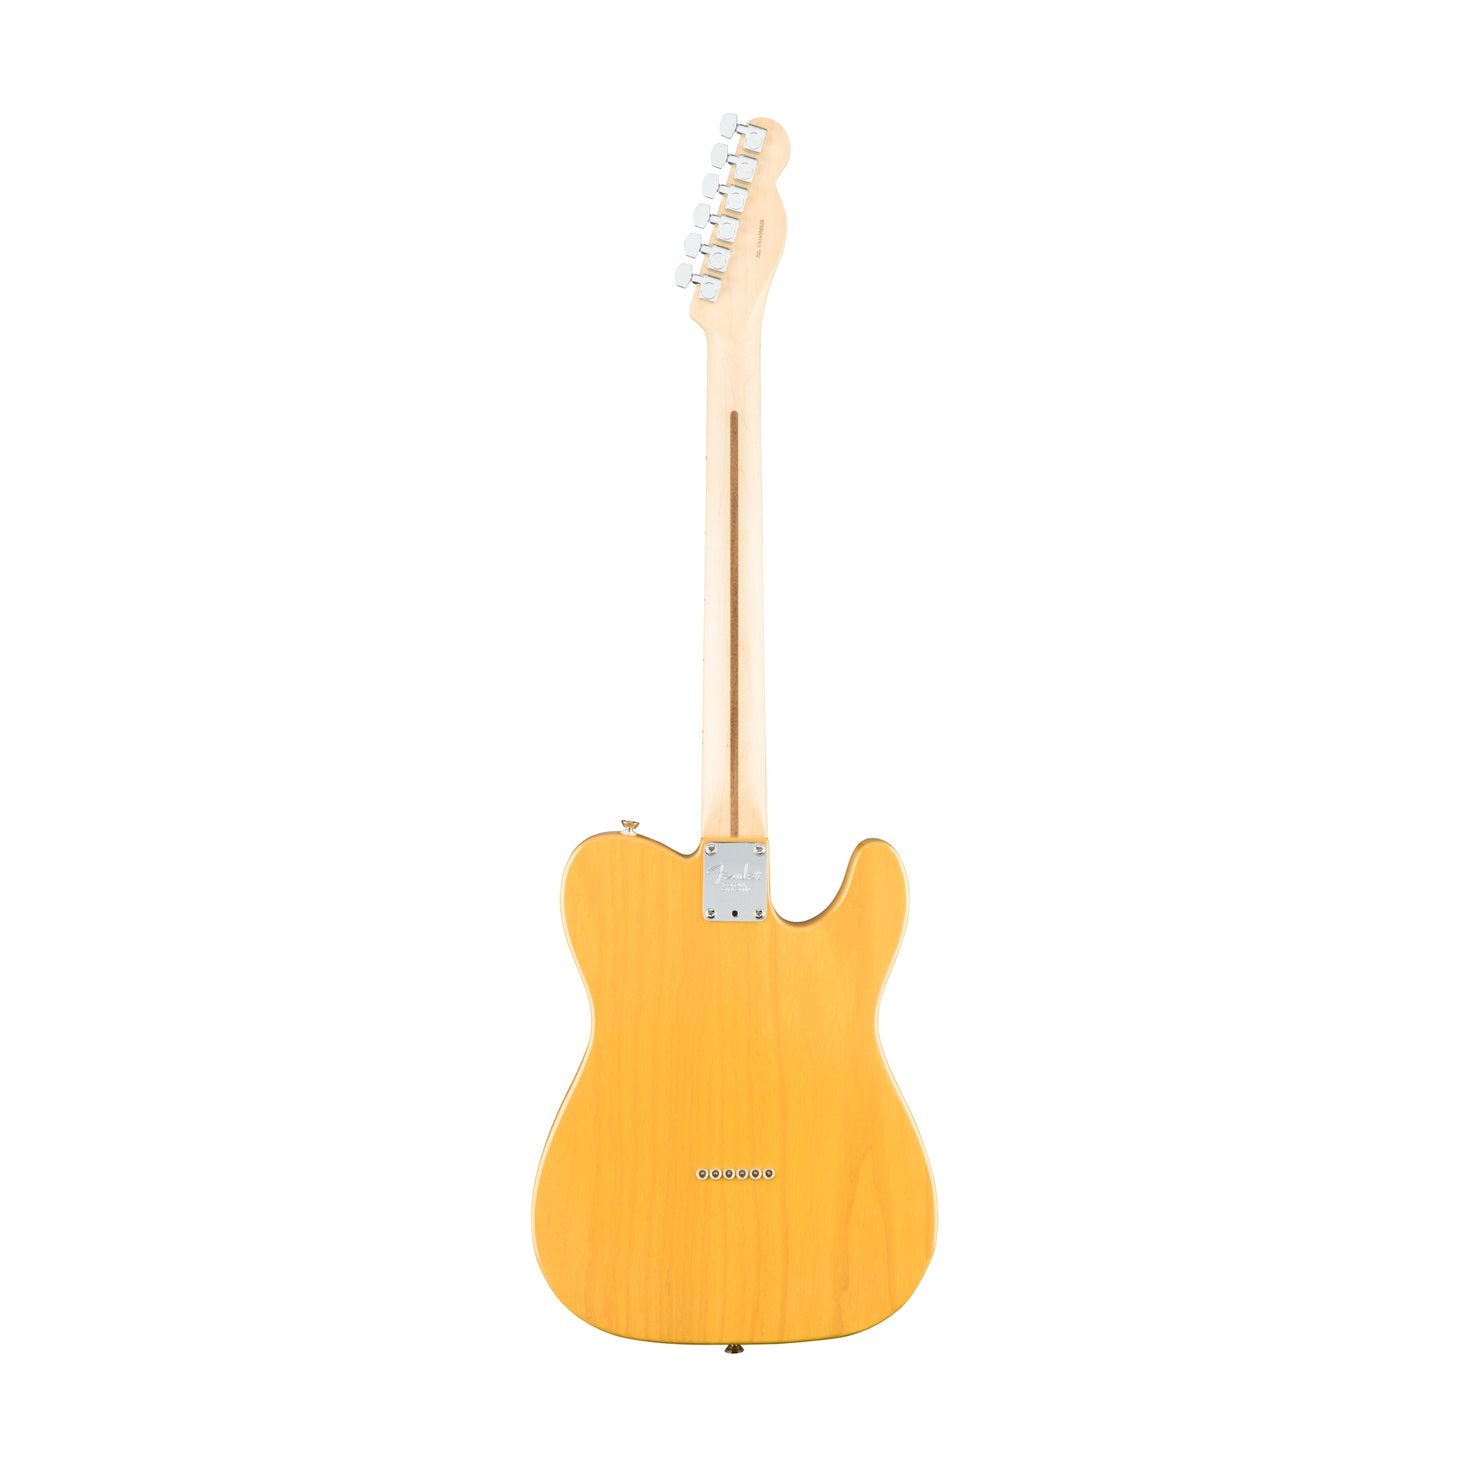 Fender American Professional Telecaster Left-Handed Electric Guitar, Maple FB, Butterscotch Blonde, FENDER, ELECTRIC GUITAR, fender-electric-guitar-f03-011-3072-750, ZOSO MUSIC SDN BHD